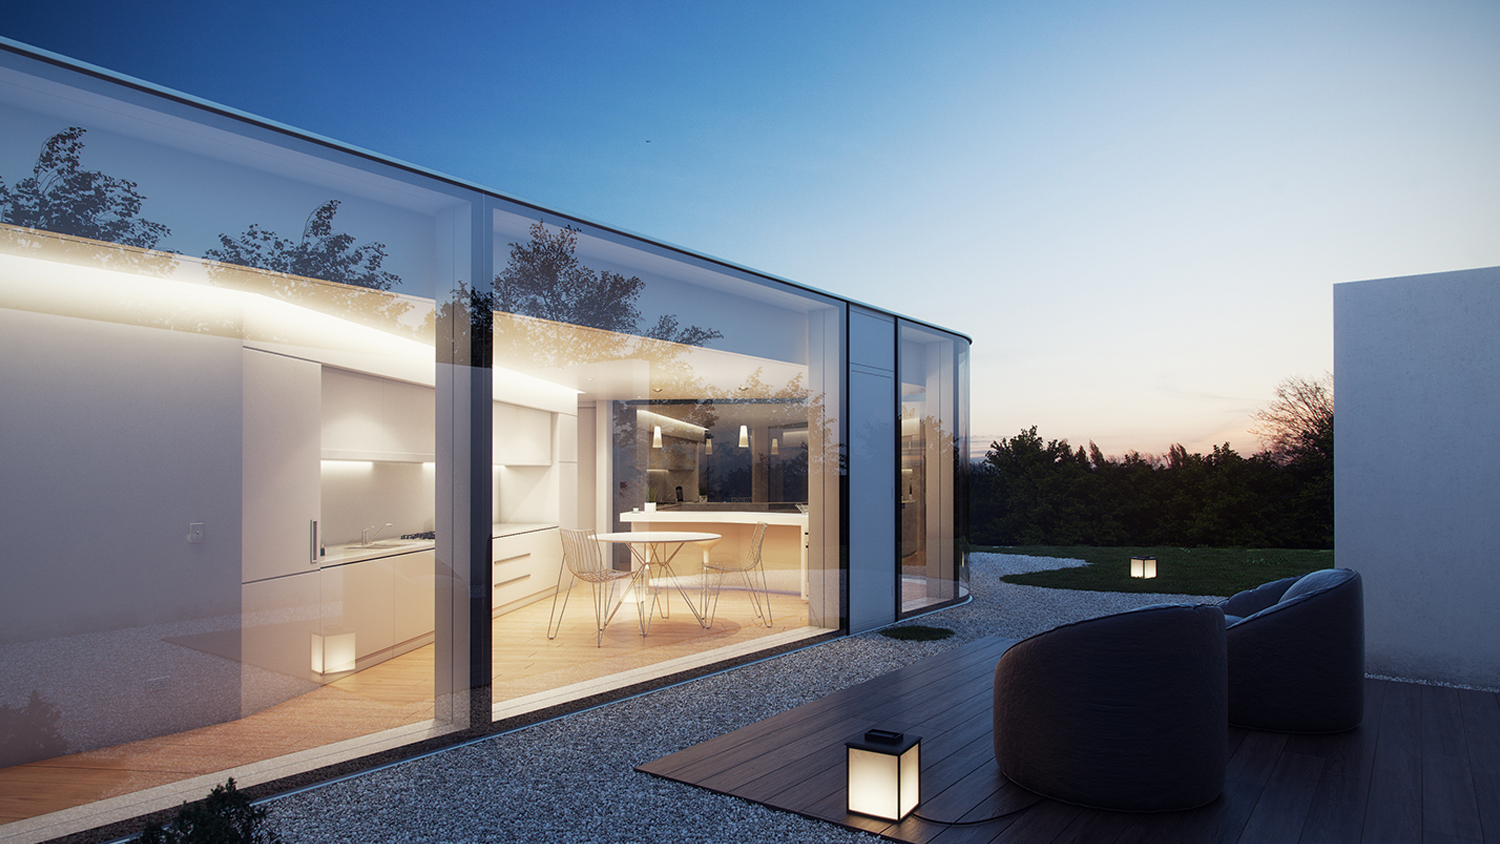 vray for sketchup 7 pro free download